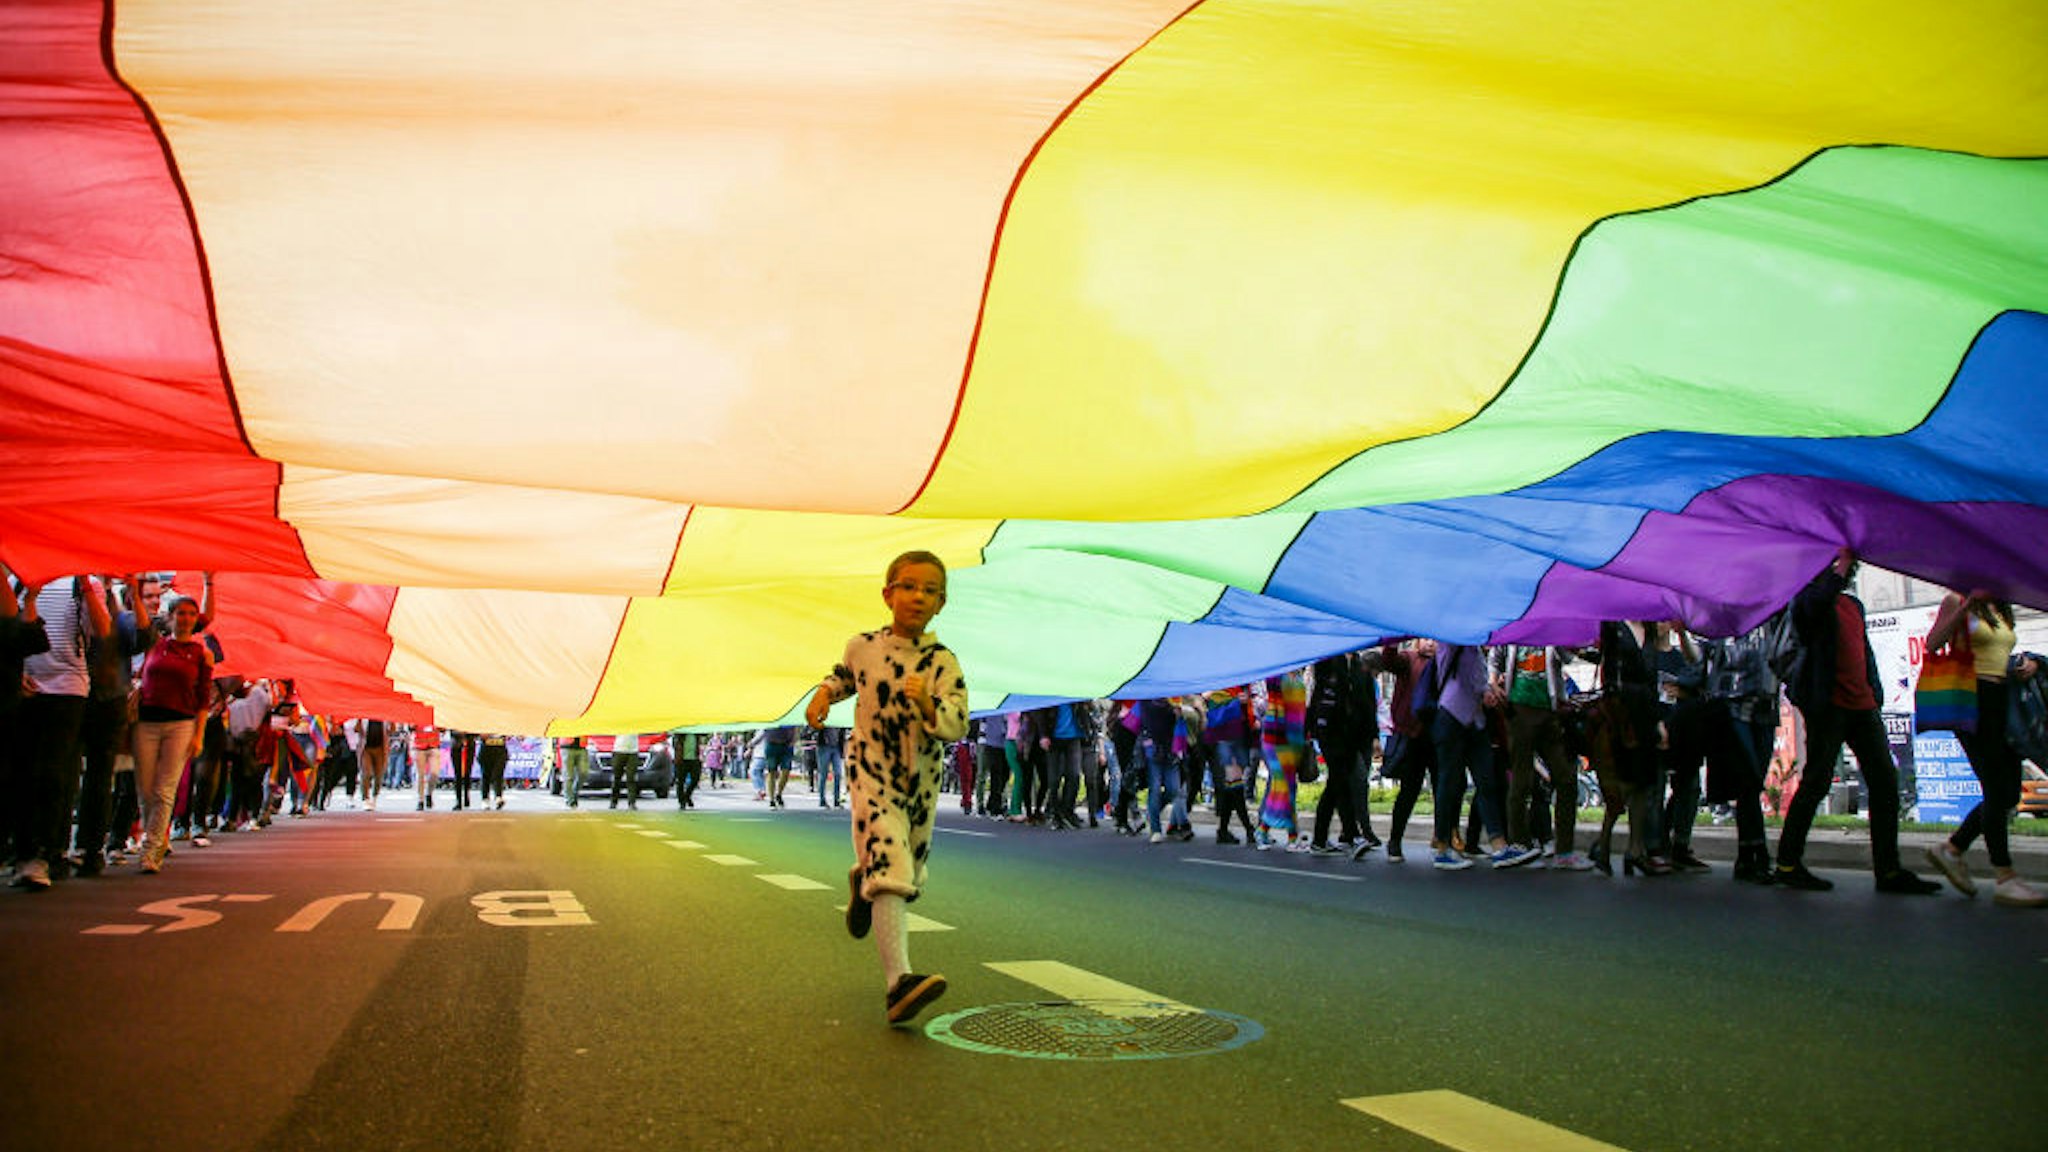 People attend the Equality March in Krakow, Poland on 19 May, 2018. LGBT people and their supporters walk through the streets of Krakow to celebrate diversity and tolerance and express their opposition to discrimination and exclusion. (Photo by Beata Zawrzel/NurPhoto via Getty Images)